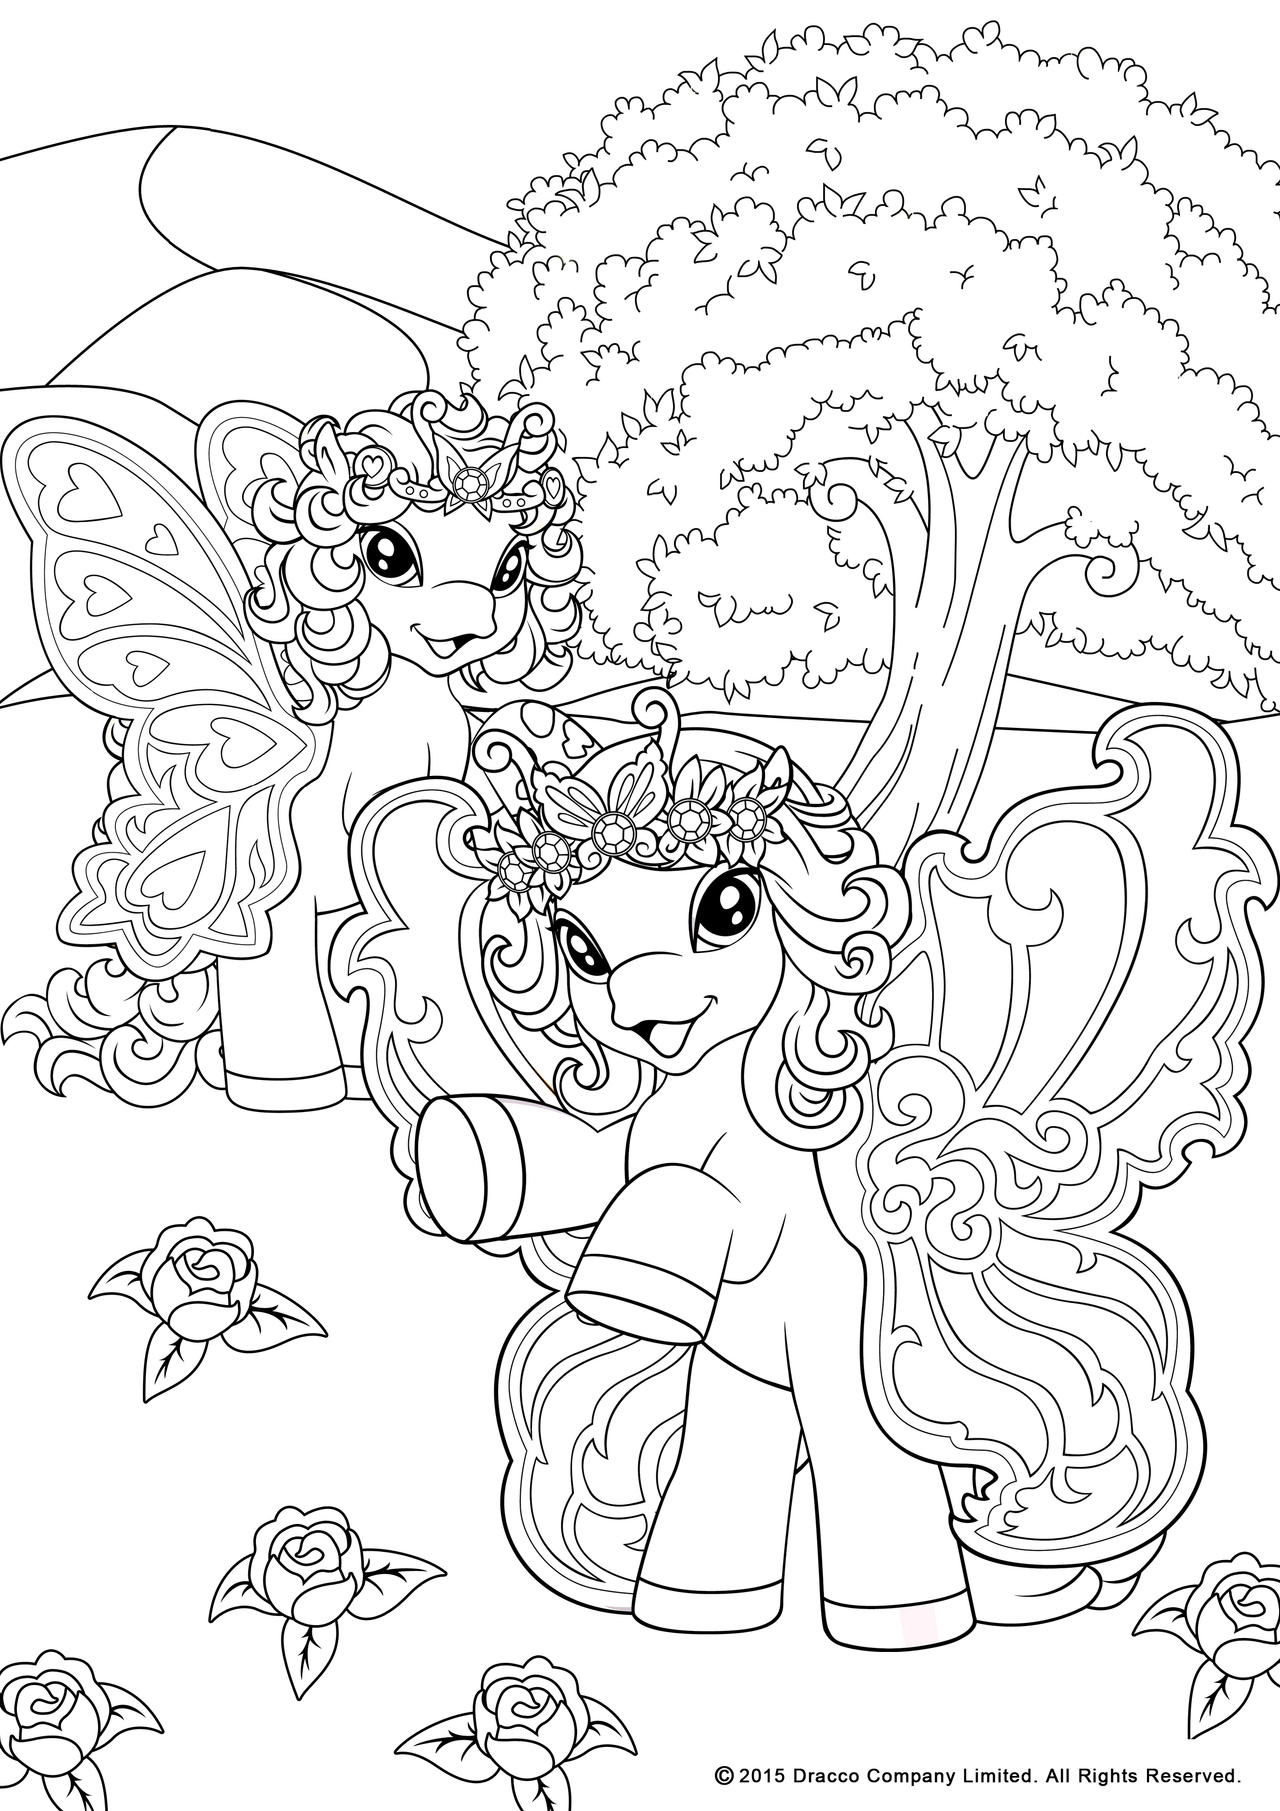 My Filly world pony toys coloring pages butterfly by 